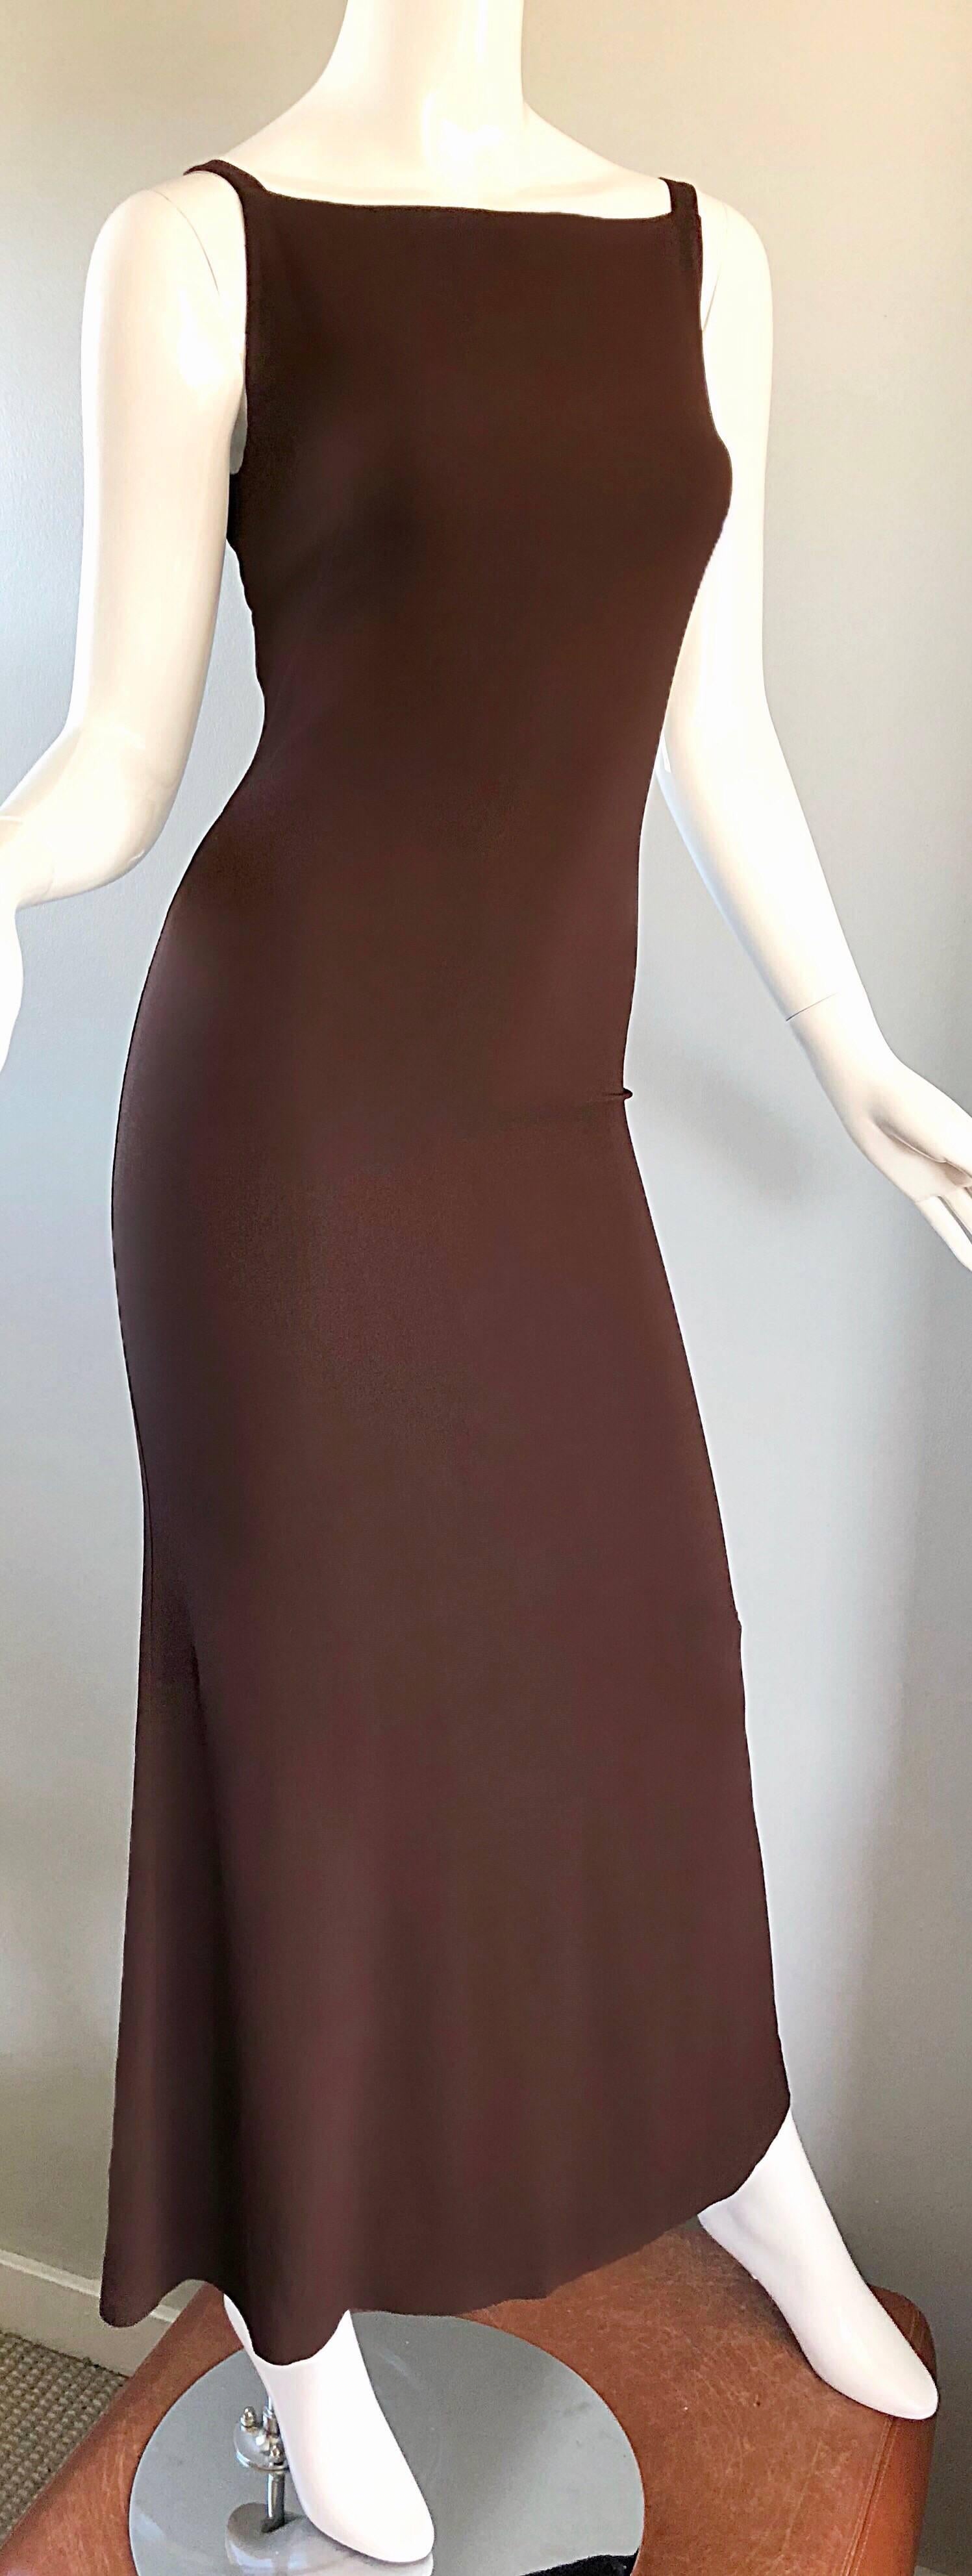 1990s Jean Paul Gaultier Vintage Chocolate Brown 'Scar' 90s Bodycon Gown Size 6 2